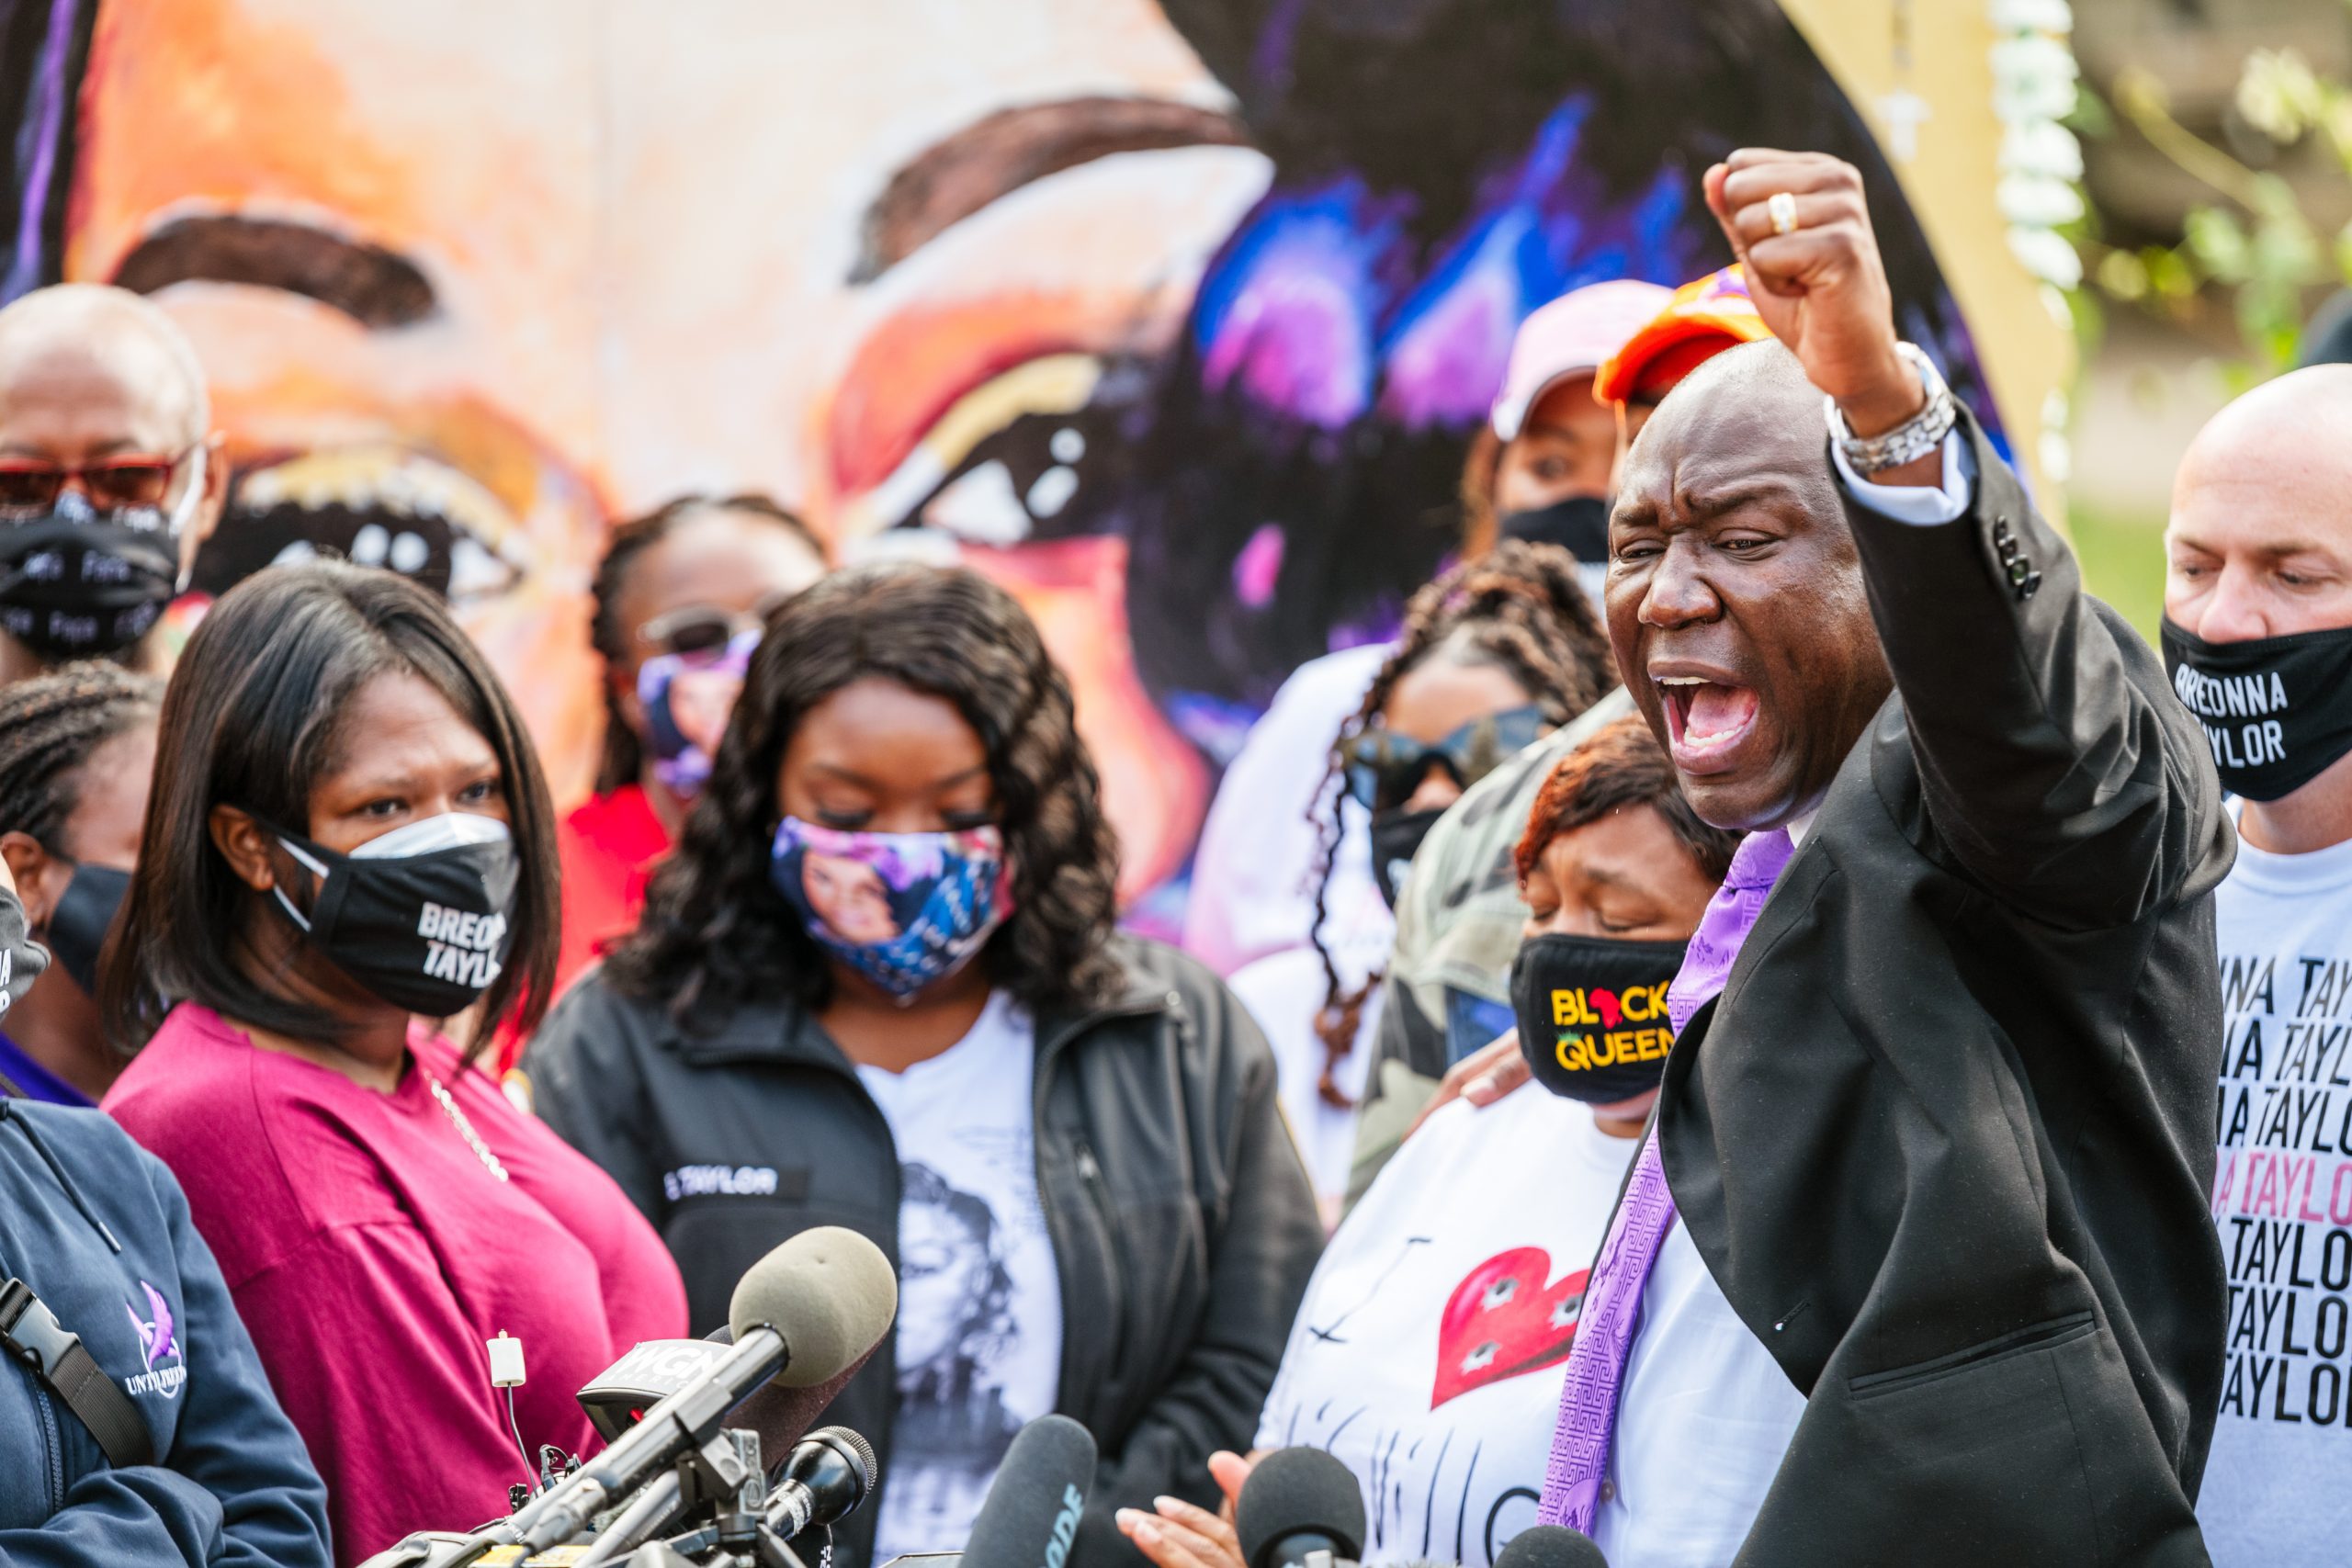 Attorney Ben Crump (R) leads a chant during a press conference on Sept 25, 2020 in Louisville, Kentucky.